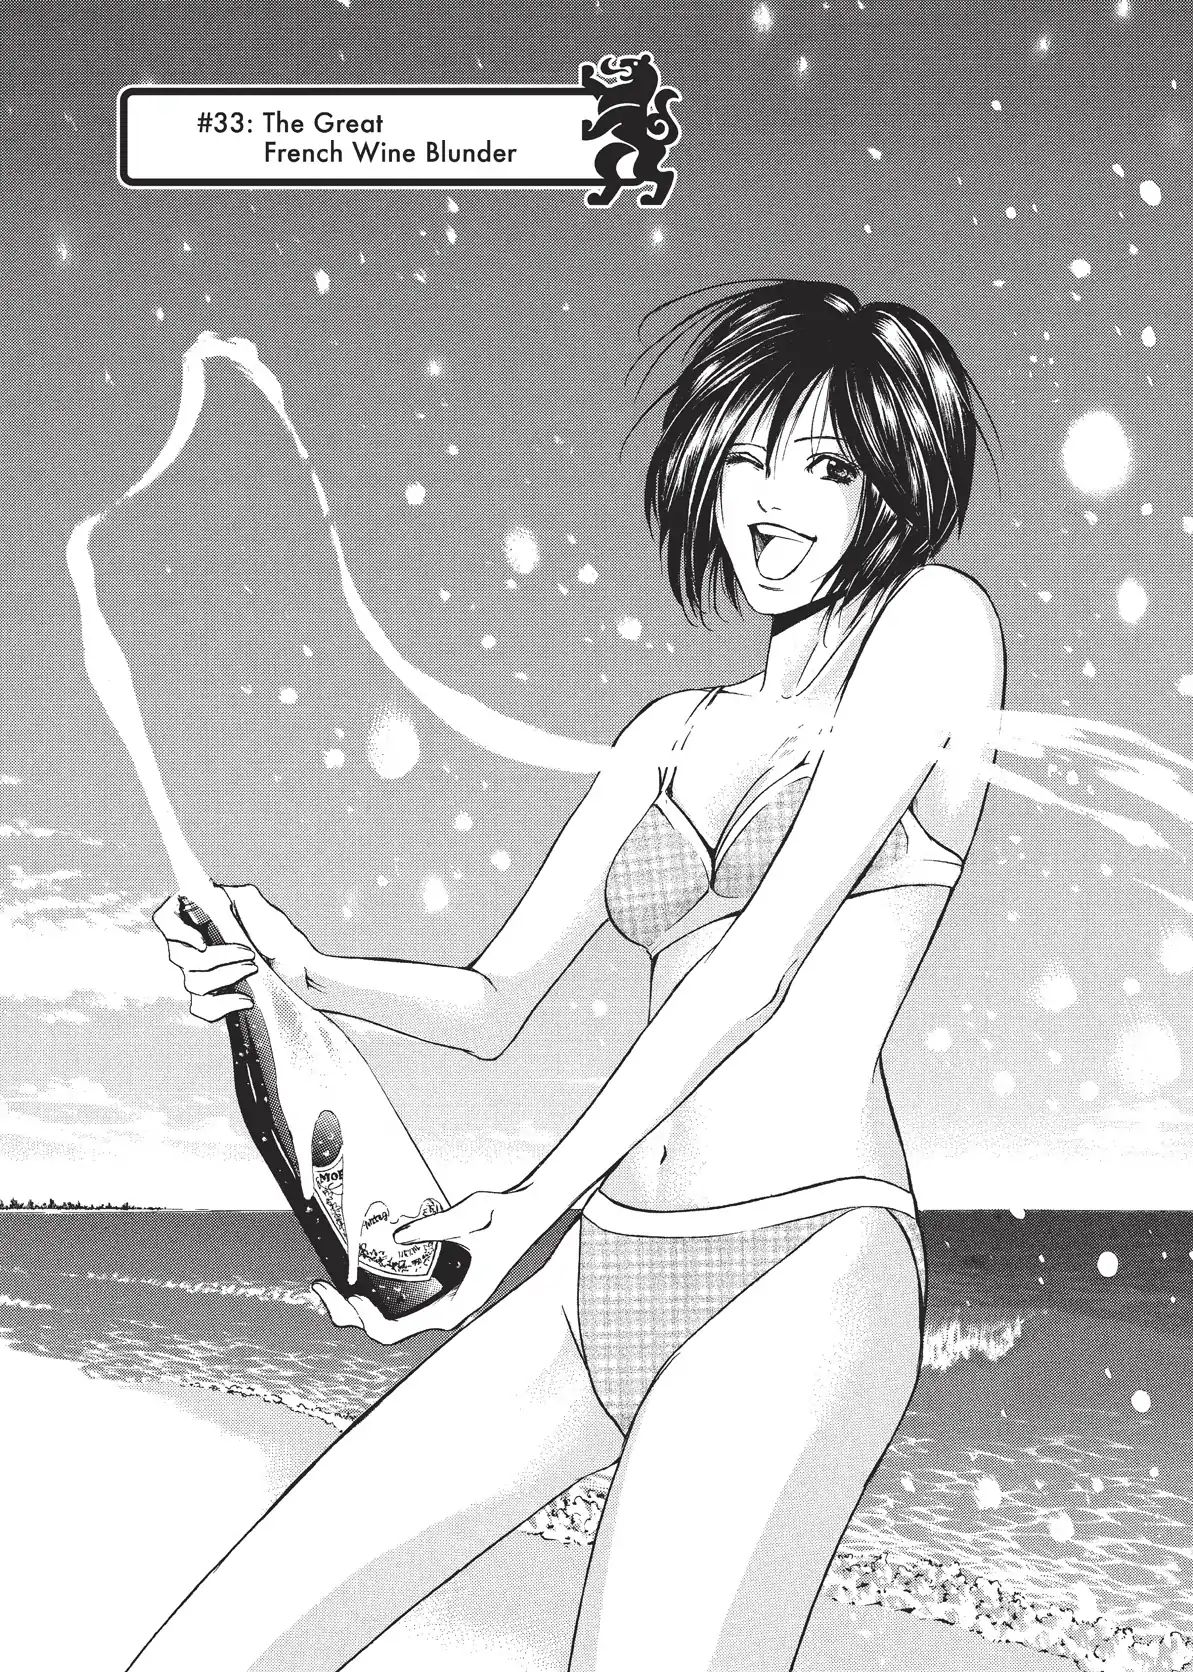 Kami No Shizuku Vol.2 Chapter 33: The Great French Wine Blunder - Picture 1